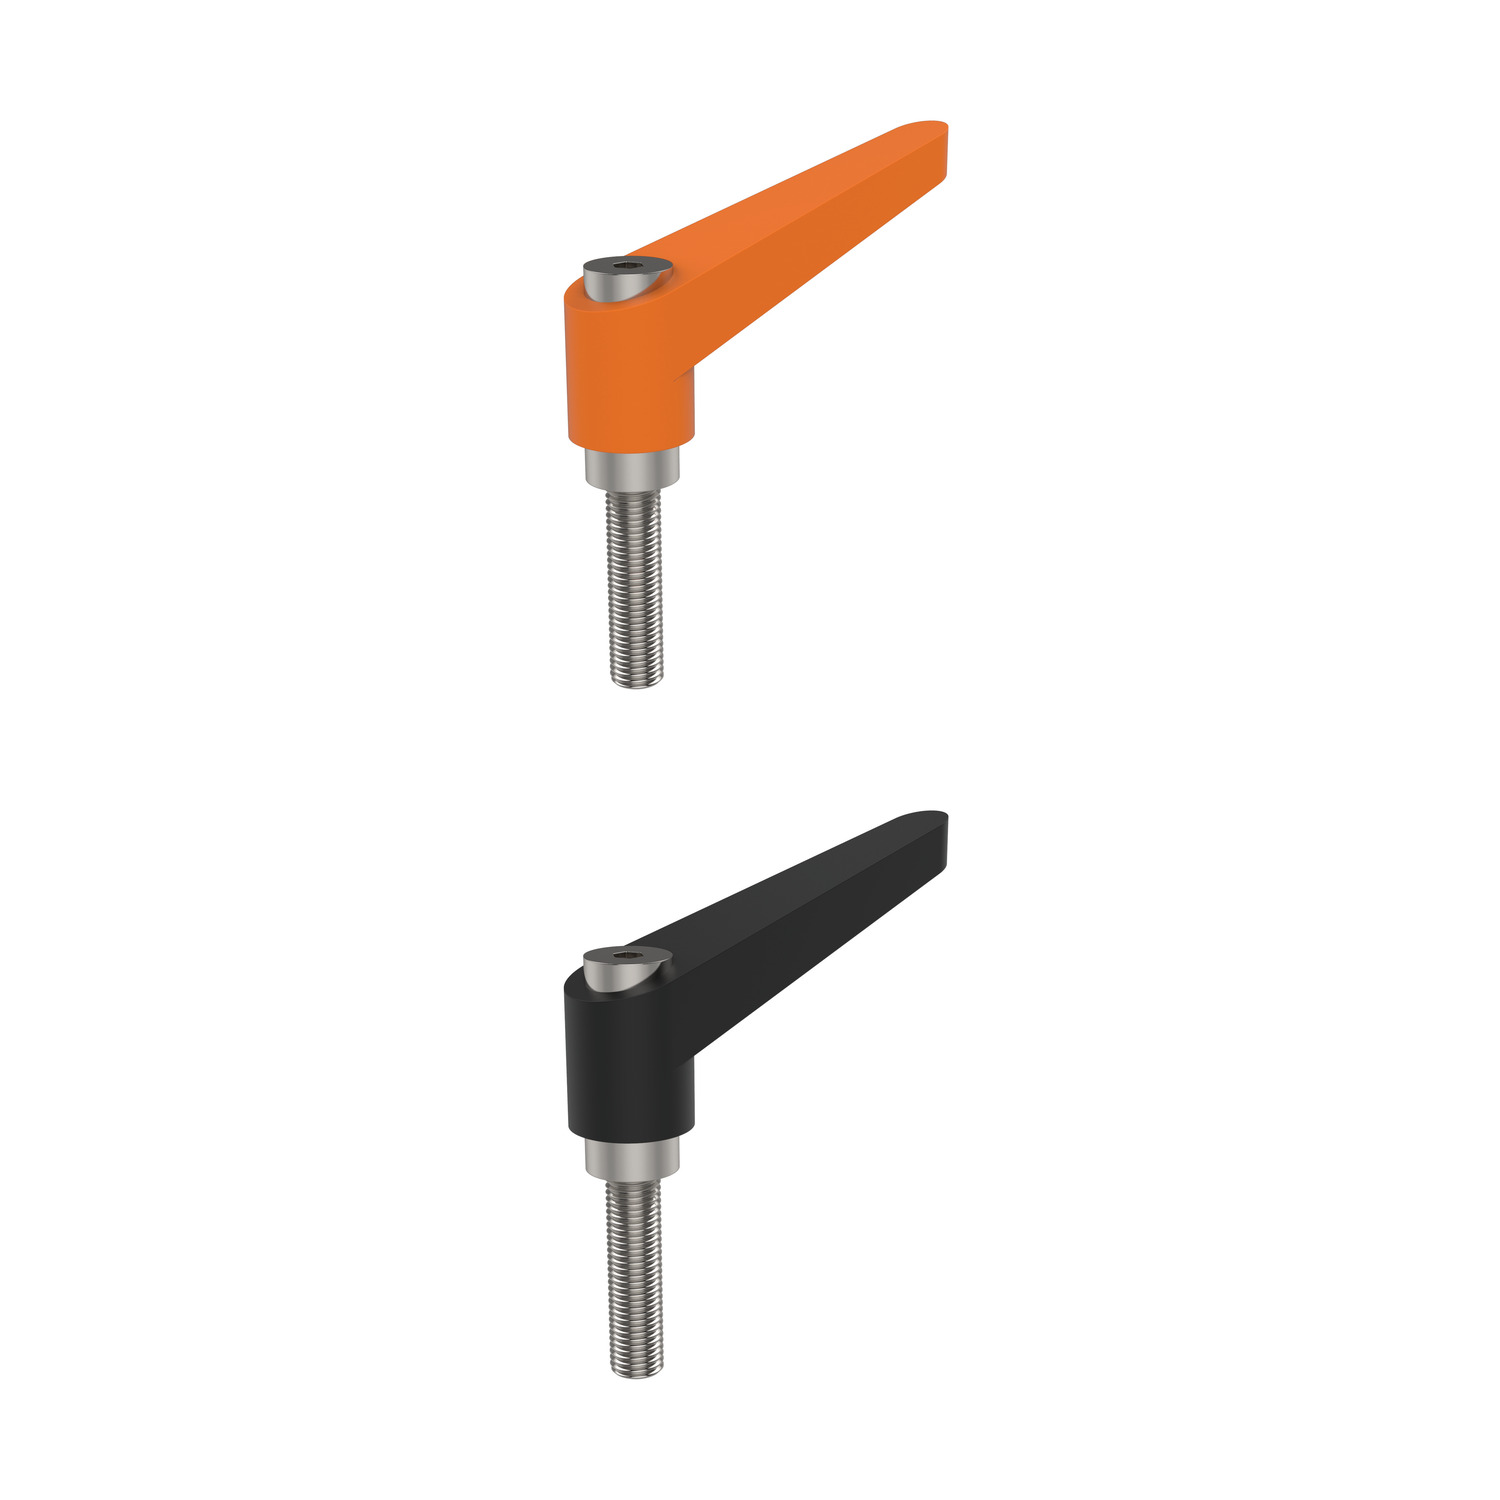 Adjustable Clamping Levers Adjustable clamping levers suitable for applications in the medical and chemical industries. Handle is made from die cast zince with stainless steel inner parts.